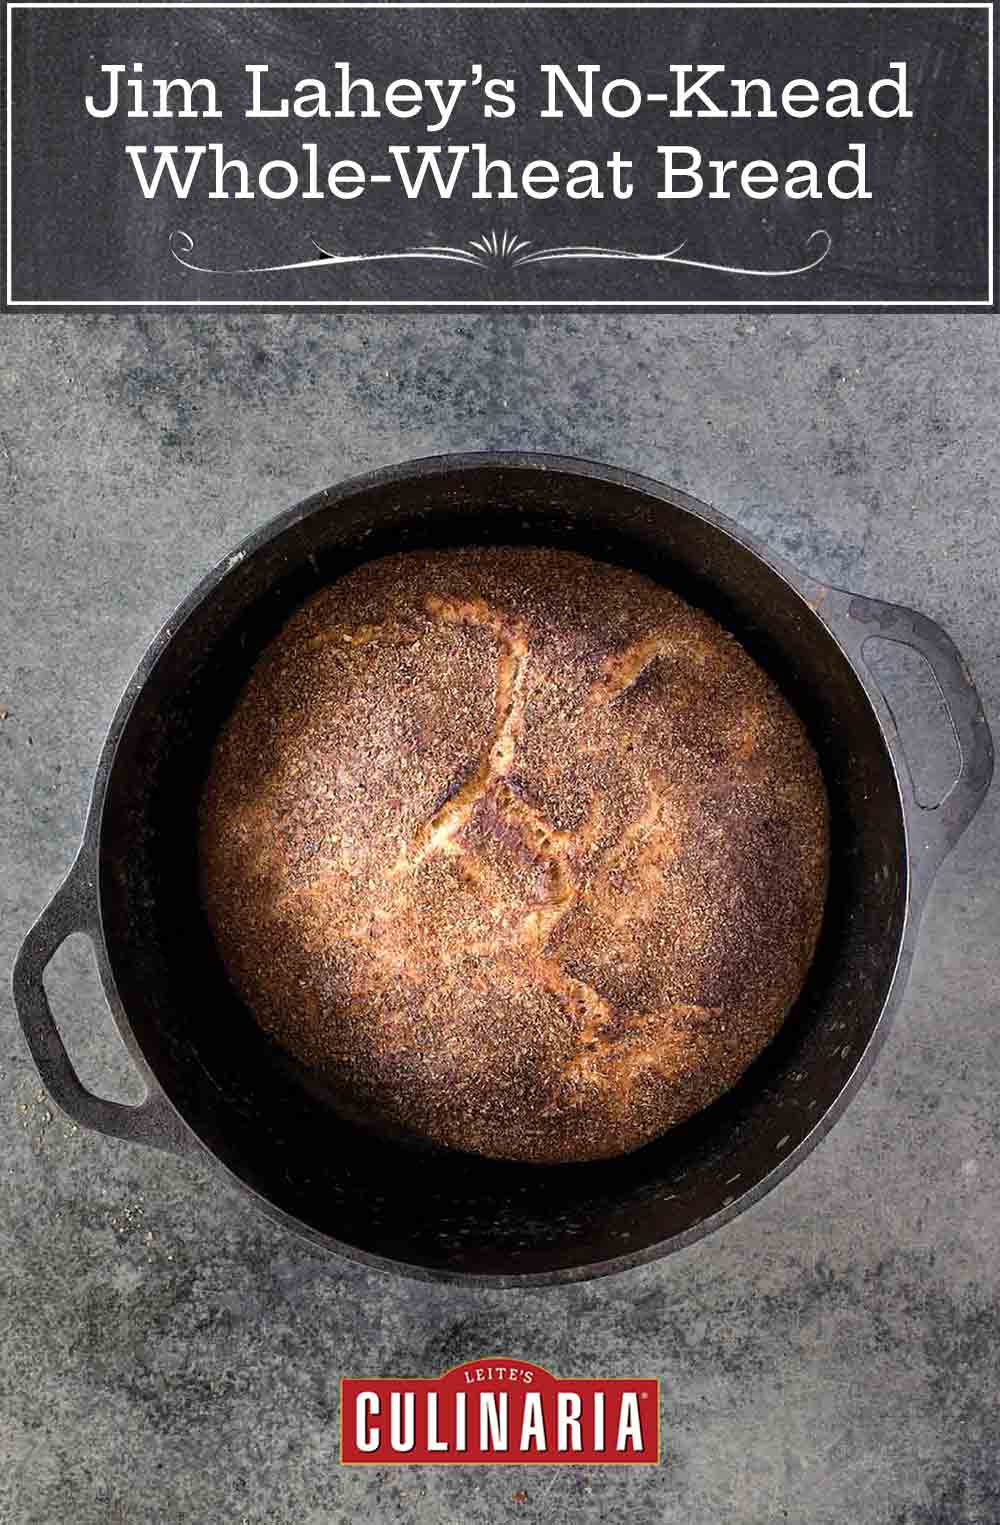 Cast-iron pot with a loaf of Jim Lahey's no-knead whole-wheat bread on a gray background